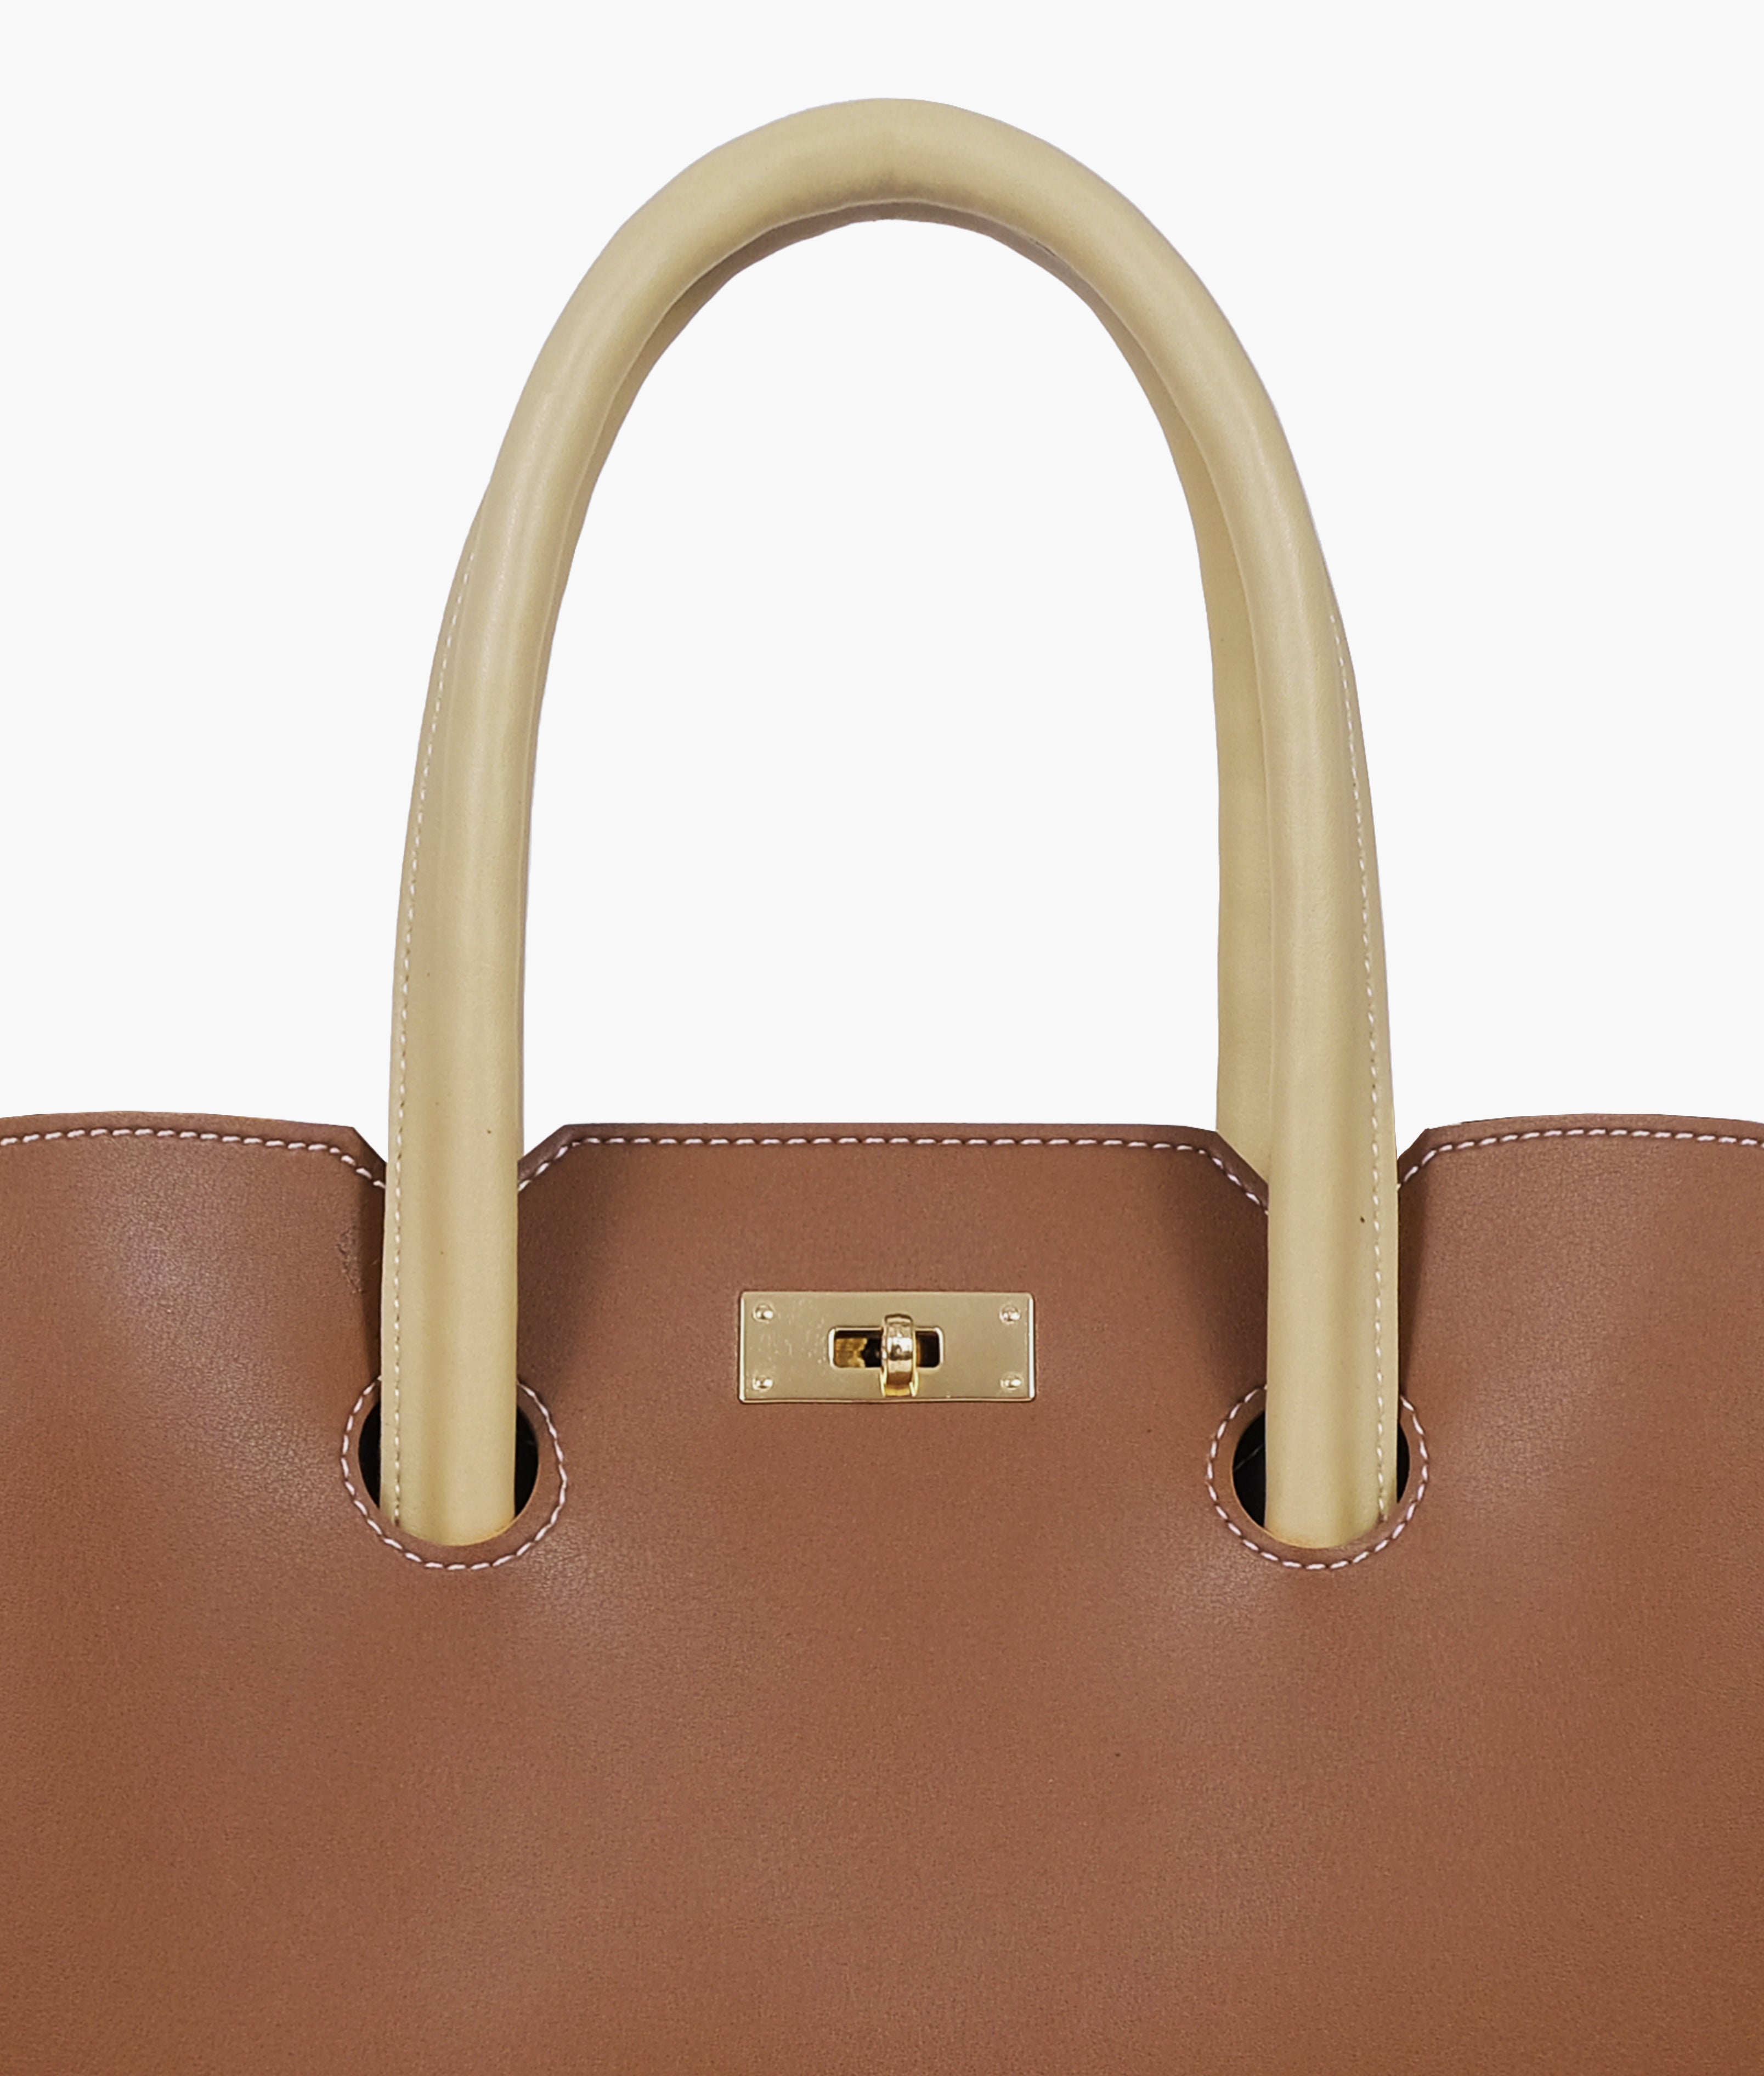 Brown and black tote bag with multiple compartments